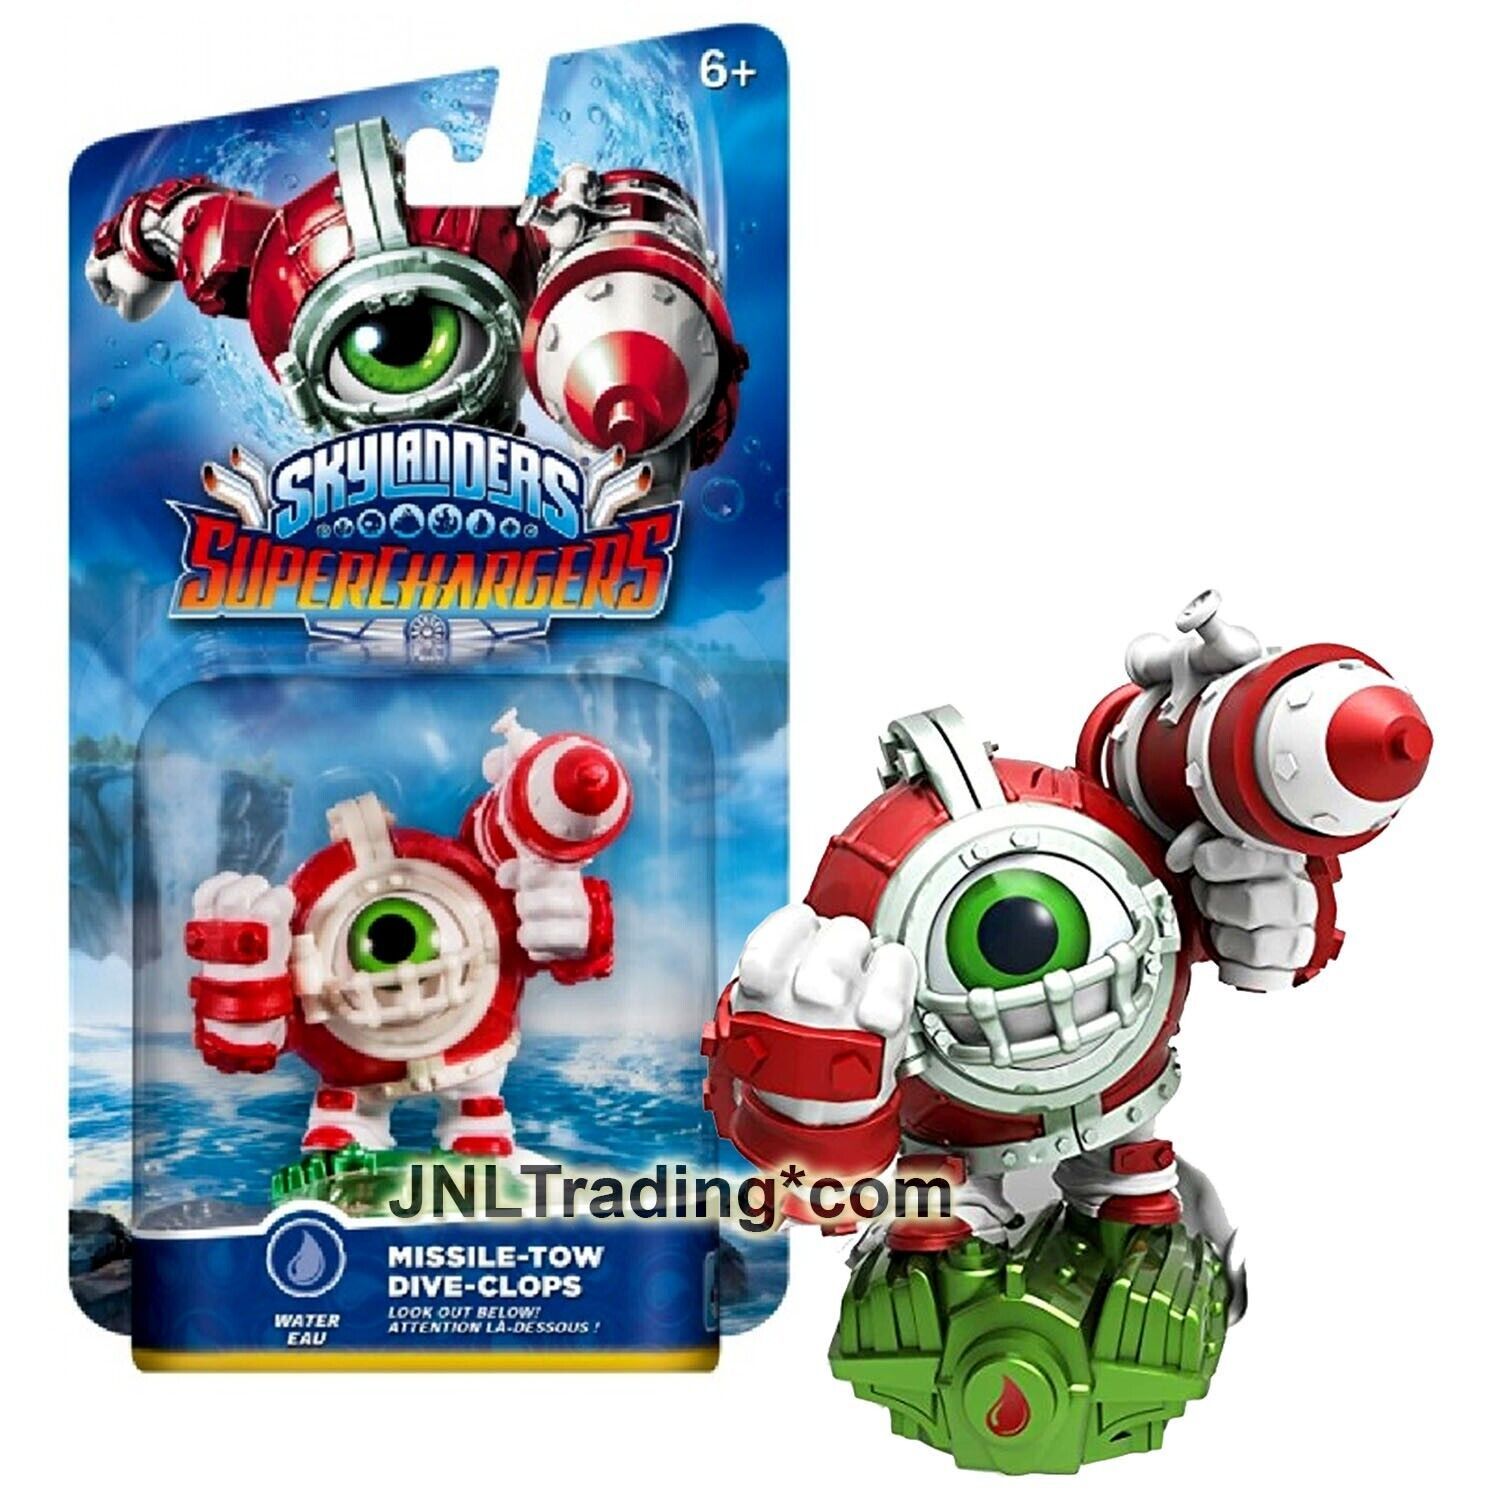 Primary image for Skylanders Superchargers 3 Inch Figure : Look Out Below! MISSILE-TOW DIVE-CLOPS